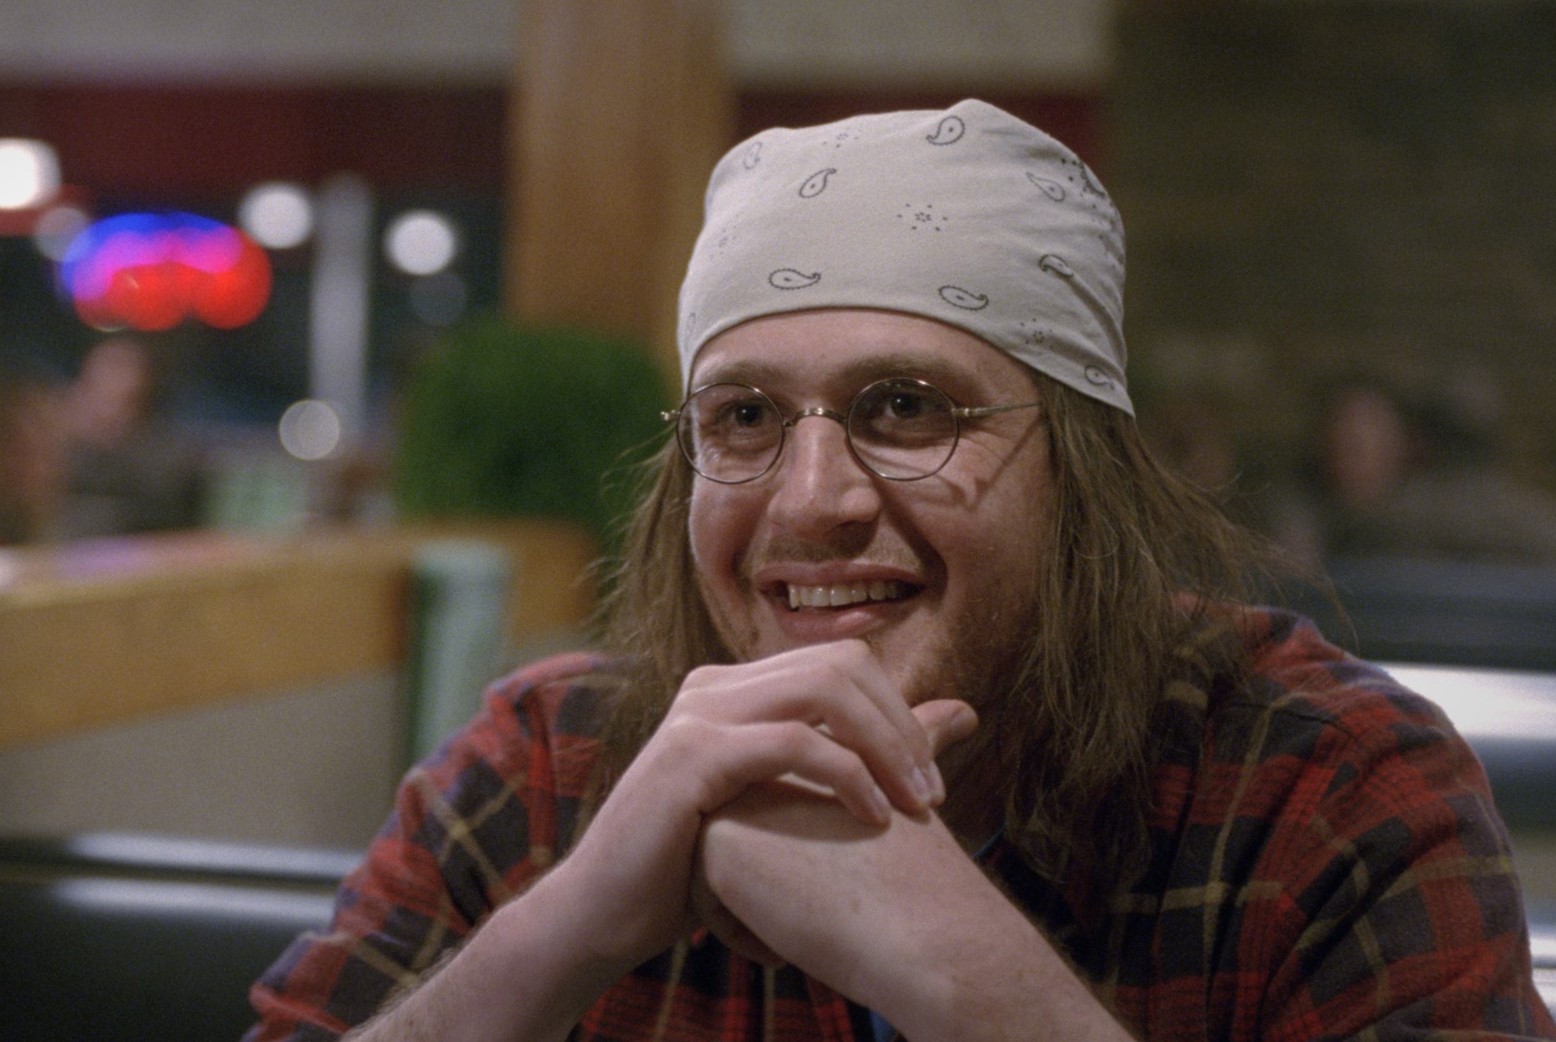 4 Things David Foster Wallace Taught Me About Teaching